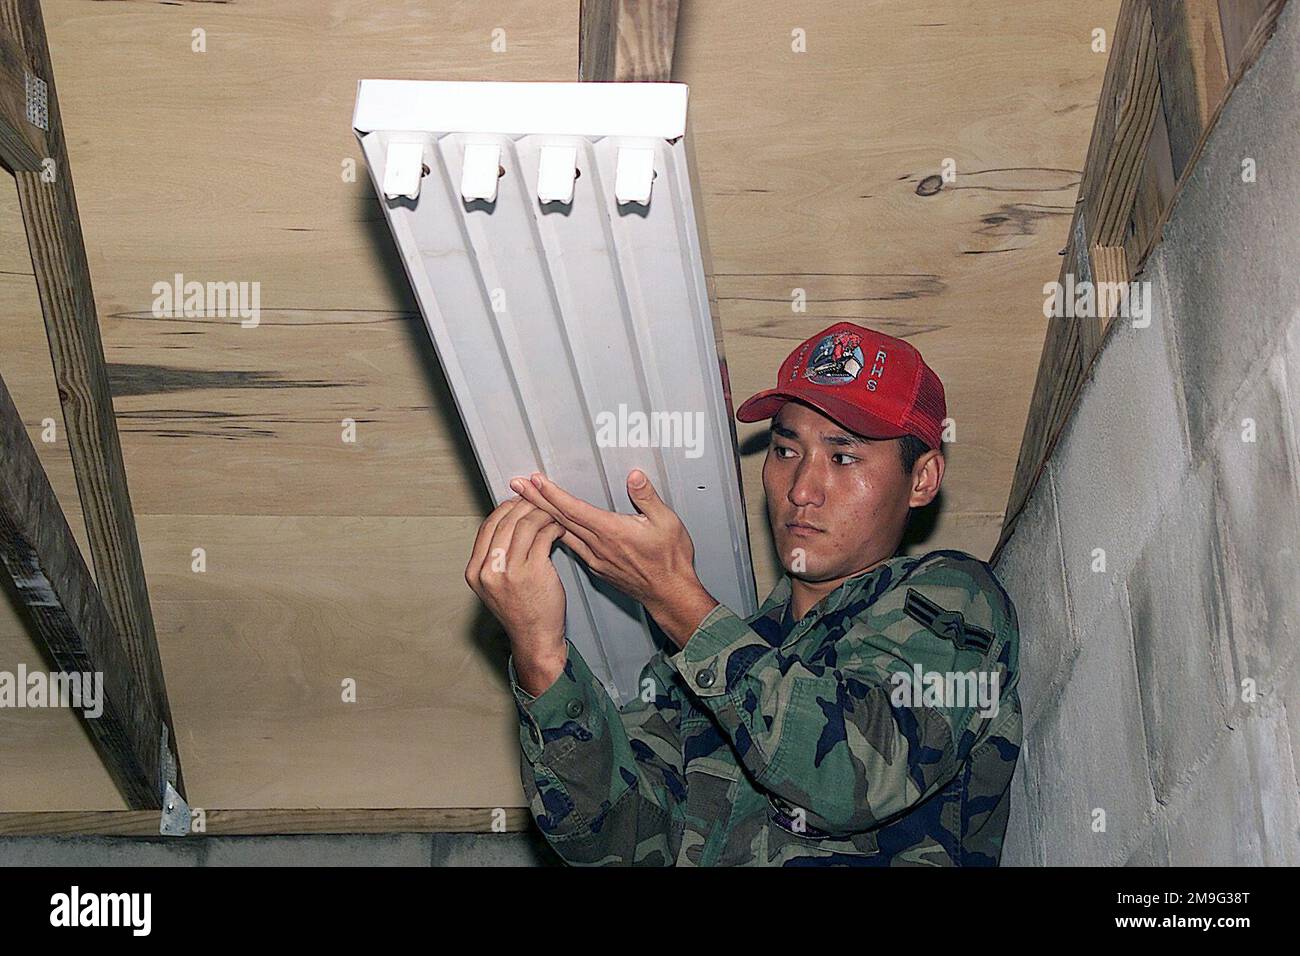 US Air Force AIRMAN First Class Kwang Kim, Electrician, 823rd Red Horse Squadron, secures a light fixture for the new school at Las Palmas Paraguay, during Exercise NEW HORIZONS. Combined Task Force Guarani Springs conducts engineering and medical operations in Paraguay, enabling joint training. The task force will renovate, construct and improve the infrastructure of four schools, four water wells, two medical clinics, and conduct mutable Medical Readiness Training Exercises (MEDRETES), and Veterinarian Readiness Training Exercises (VETRETES) as agreed to by the government of Paraguay. Subjec Stock Photo